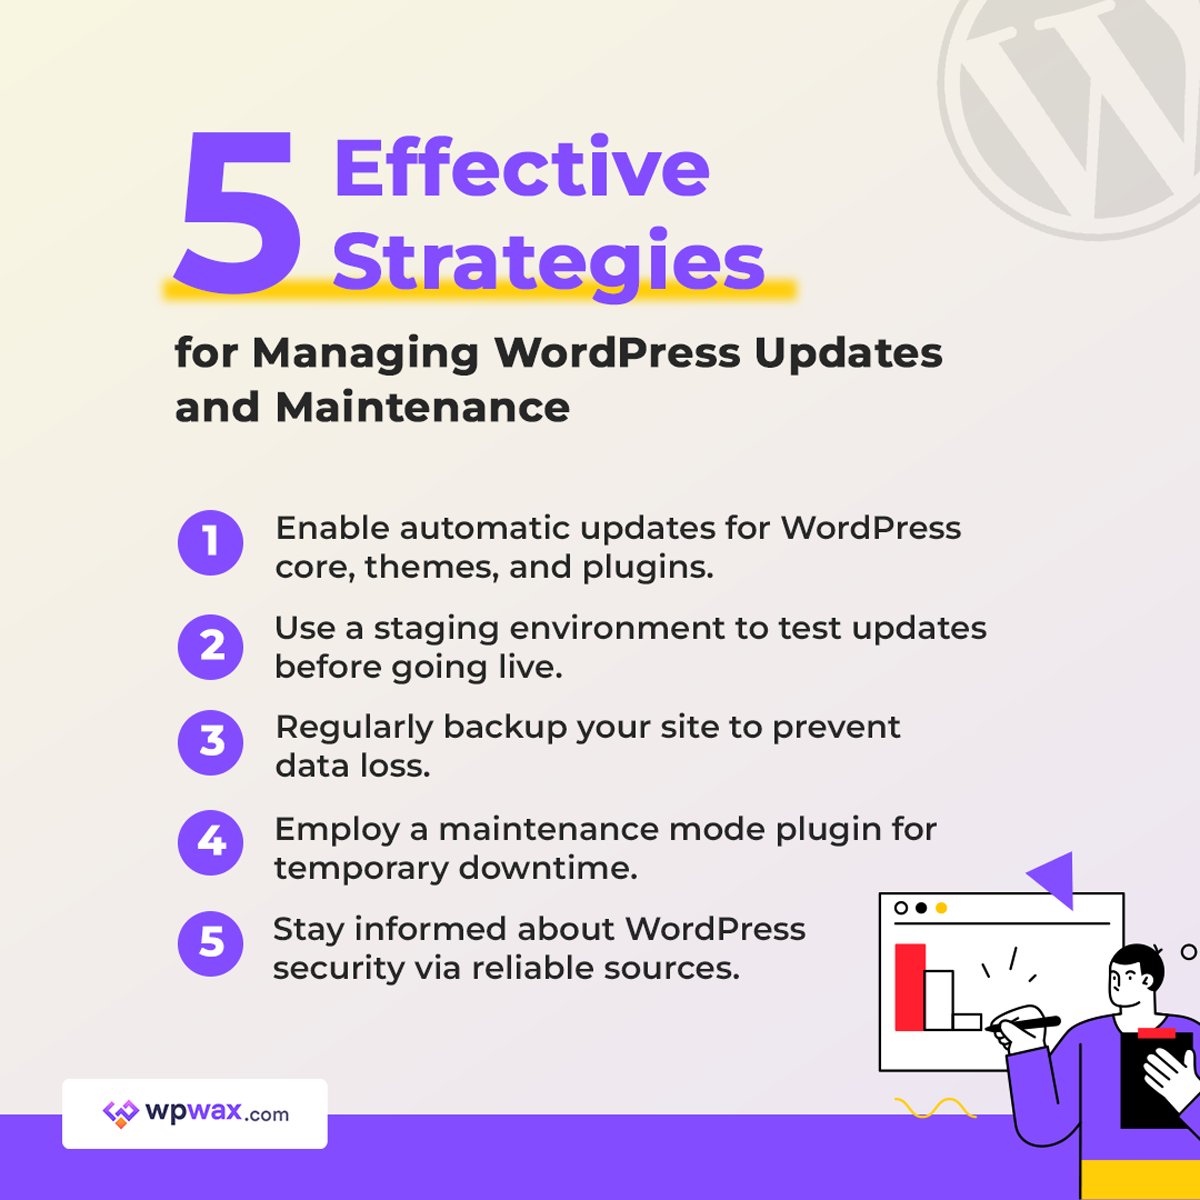 Explore 5 secret strategies to keep your WordPress site secure & smooth! Learn to safeguard your online presence now.
#wordpressmaintenance #wordpressupdates #websitemaintenance #websiteperformance #websiteoptimization